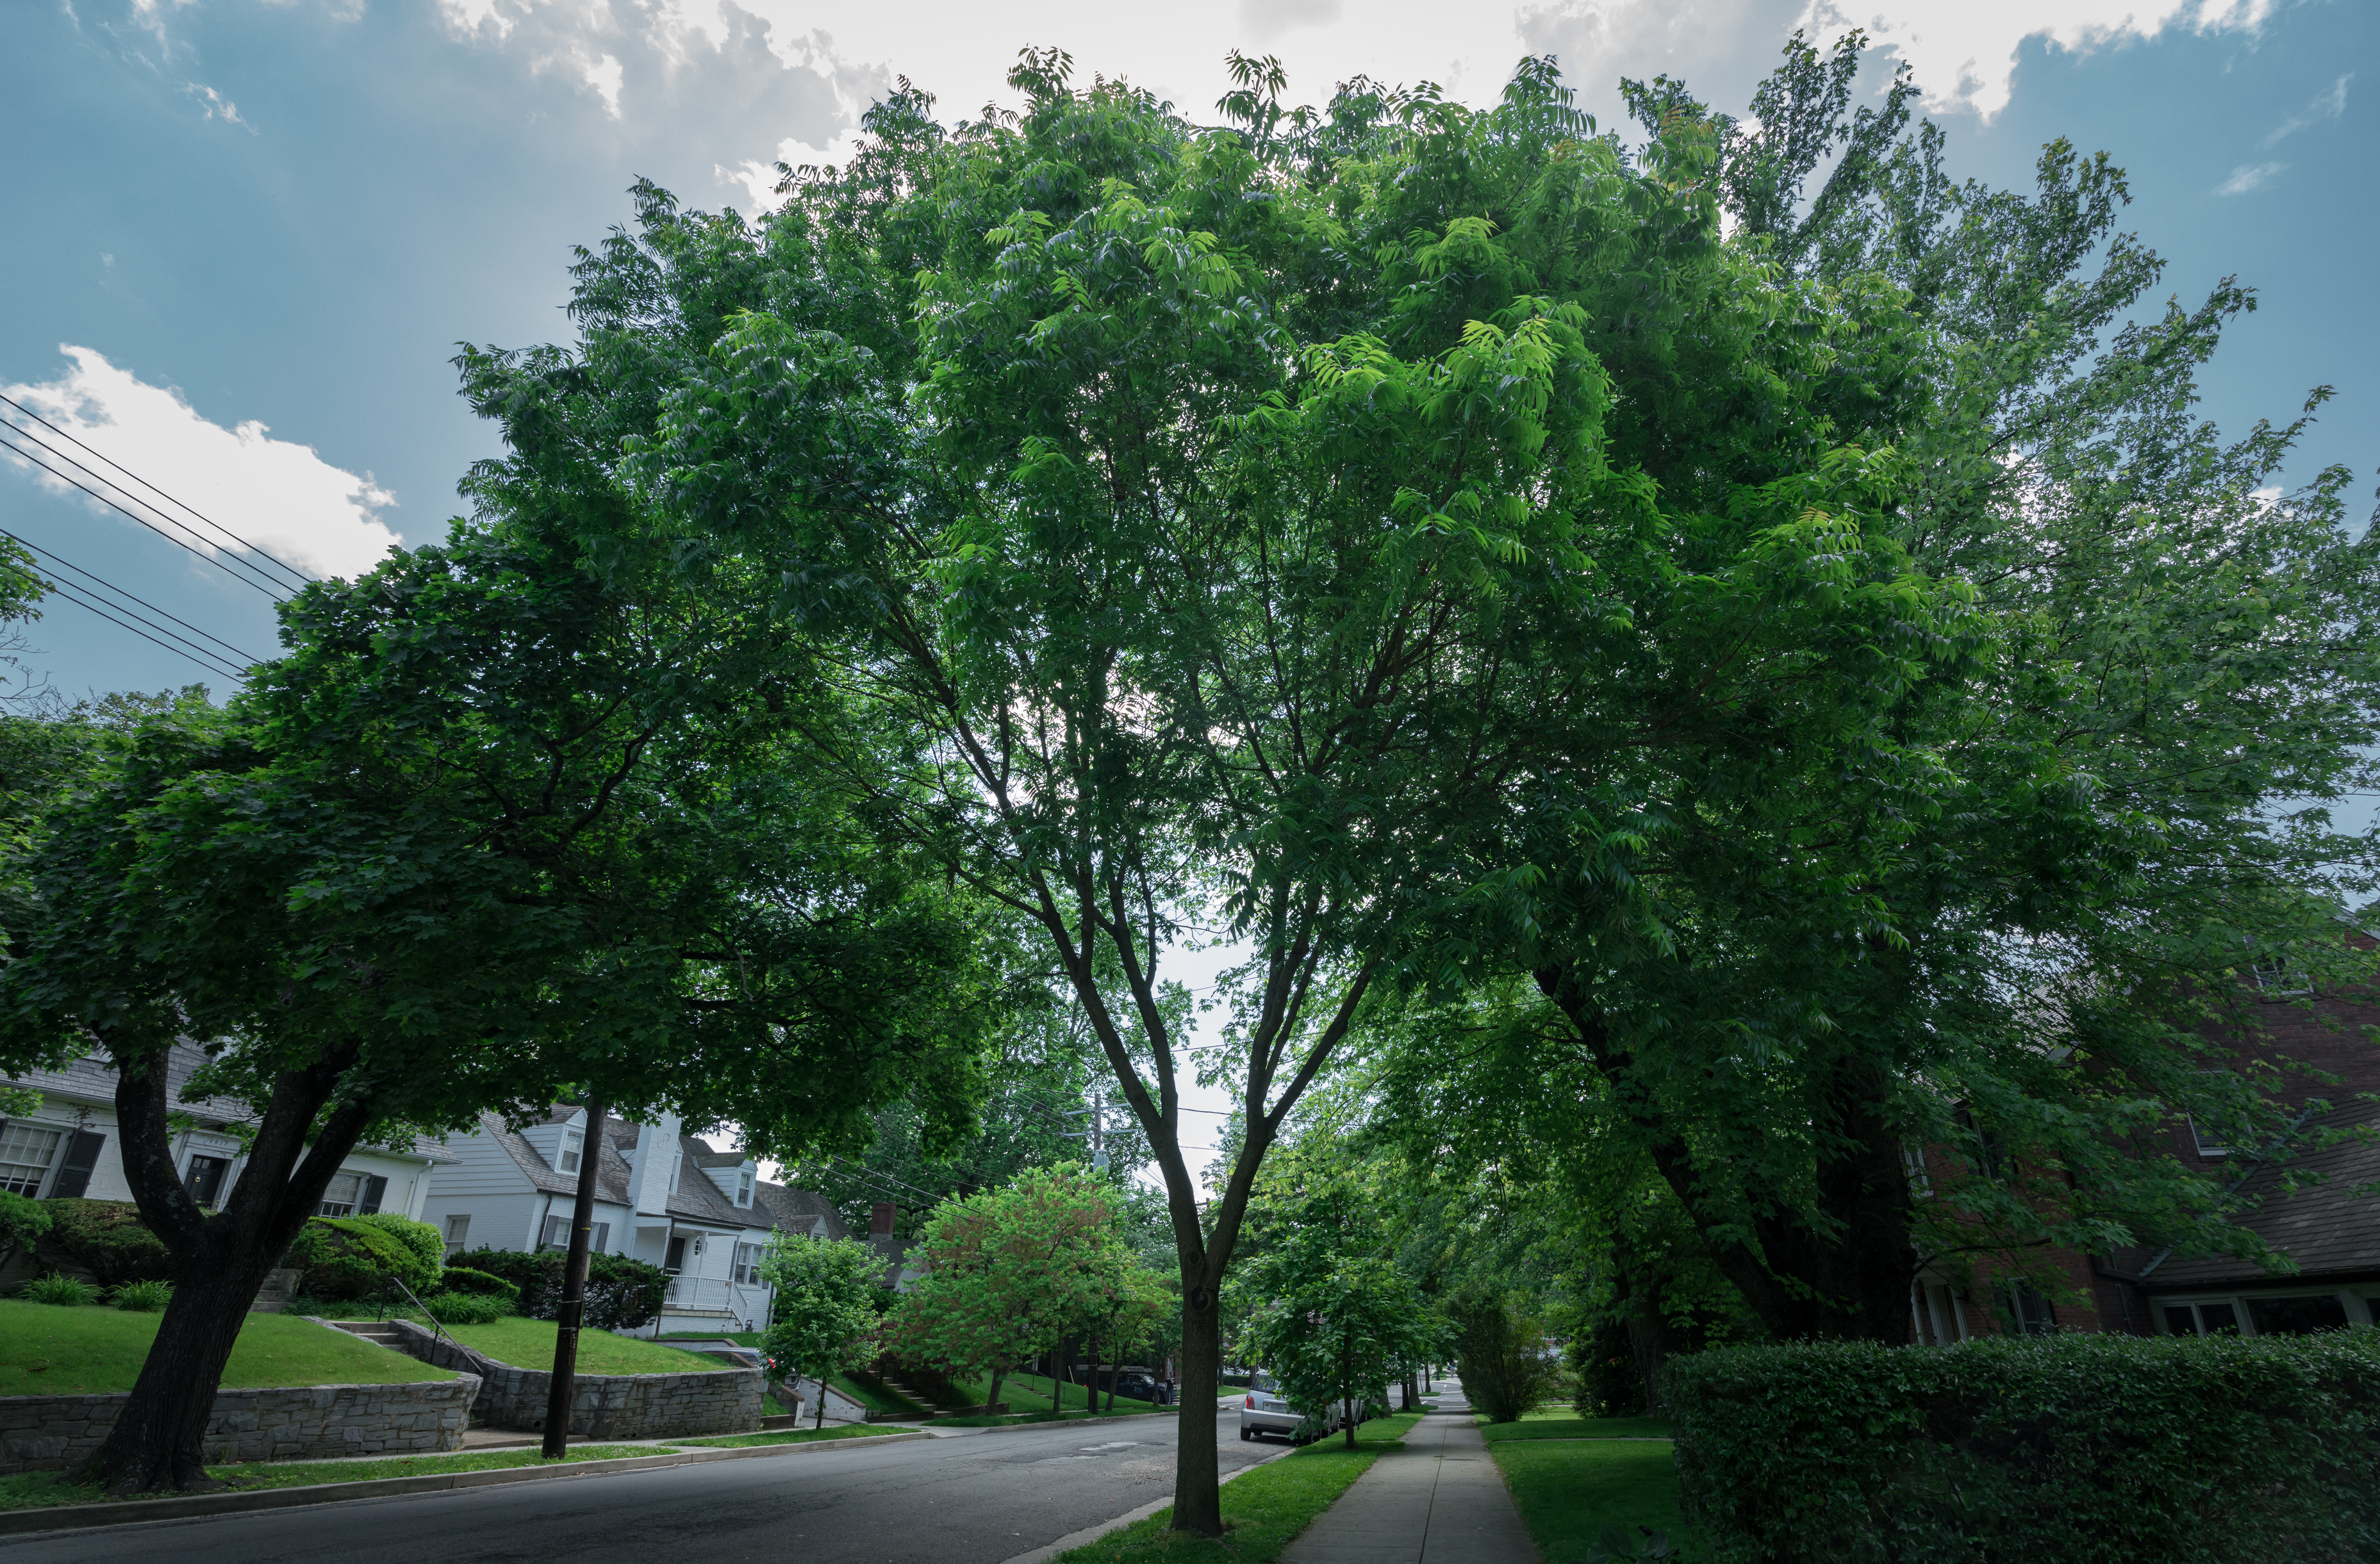 trees of the urban forest, near homes on residential streets